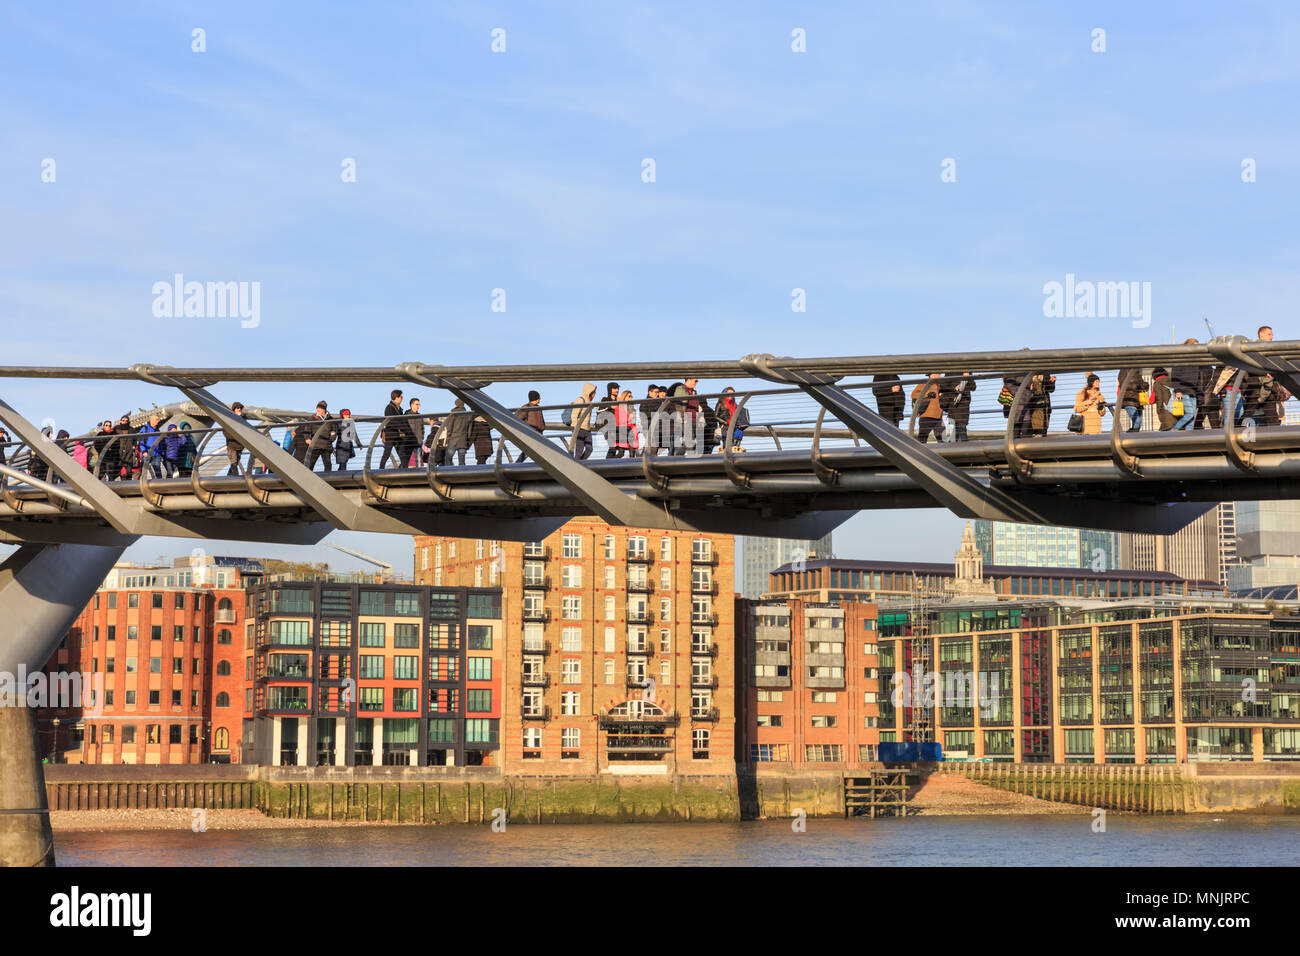 People walking across the Millennium Bridge above the River Thames on a beautiful sunny day, London, England, UK Stock Photo